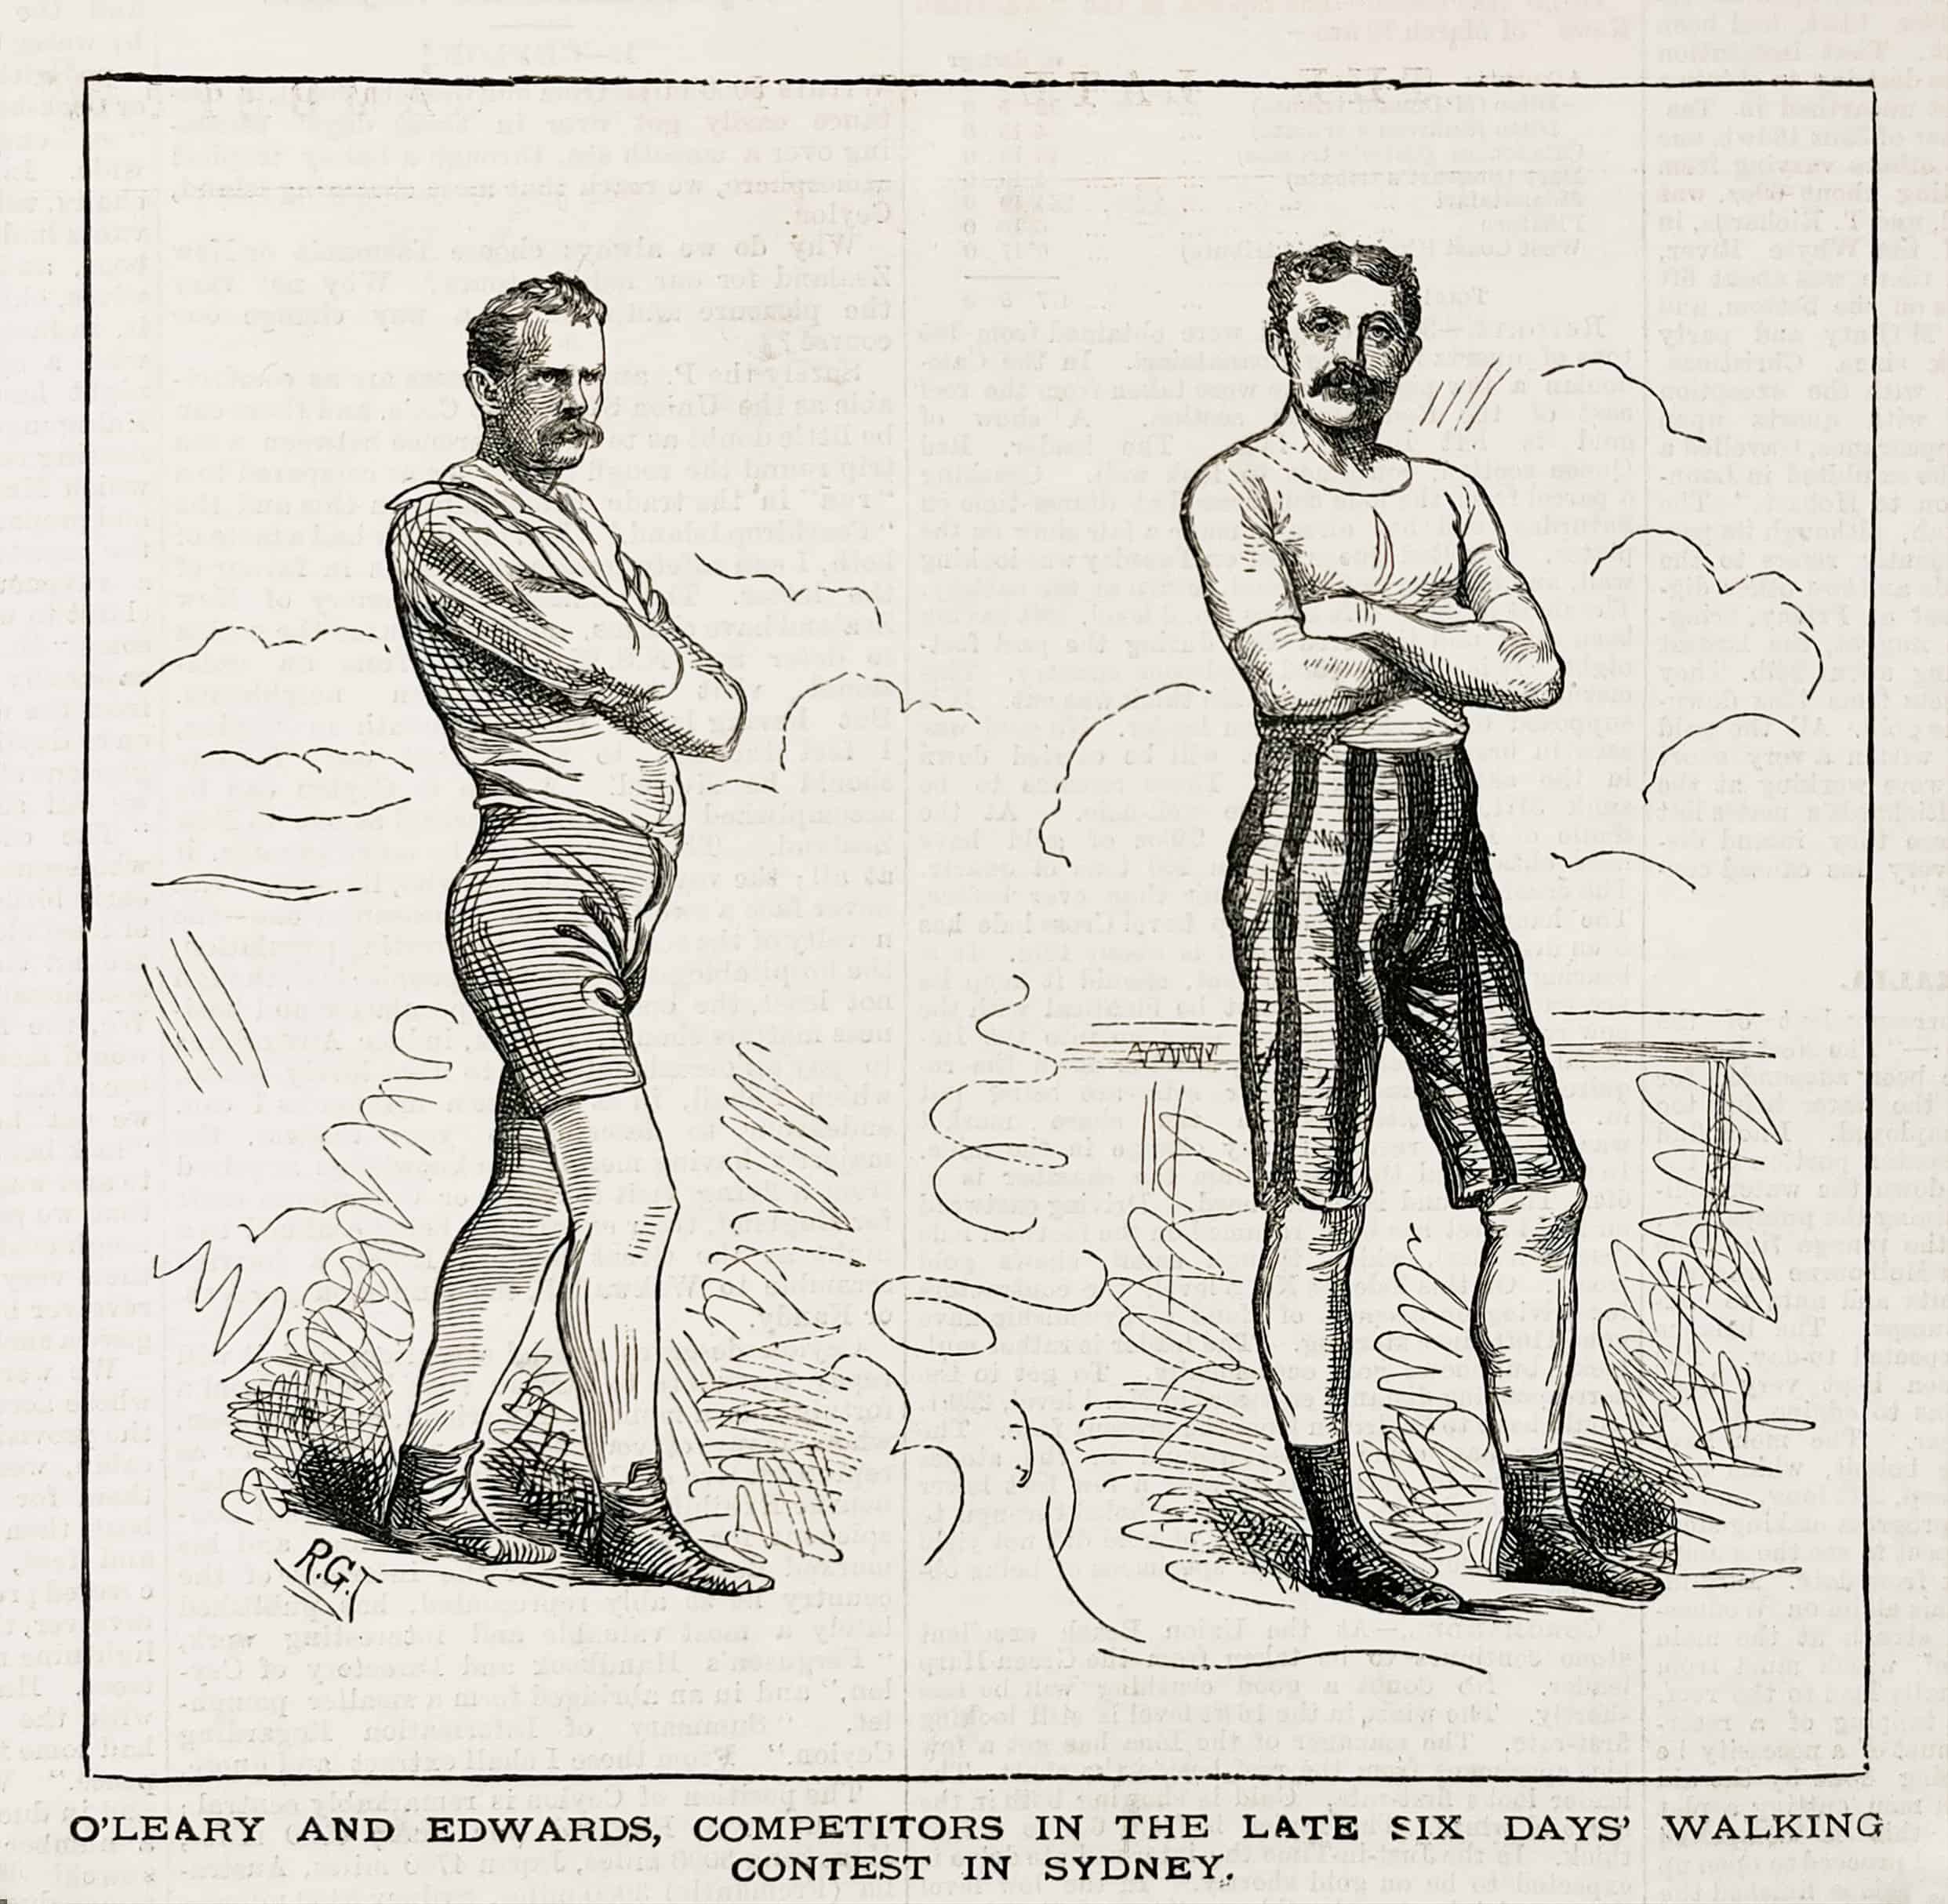 O'Leary and Edwards, Competitors in the Late six days' Walking Contest in Sydney. - Antique Print from 1883